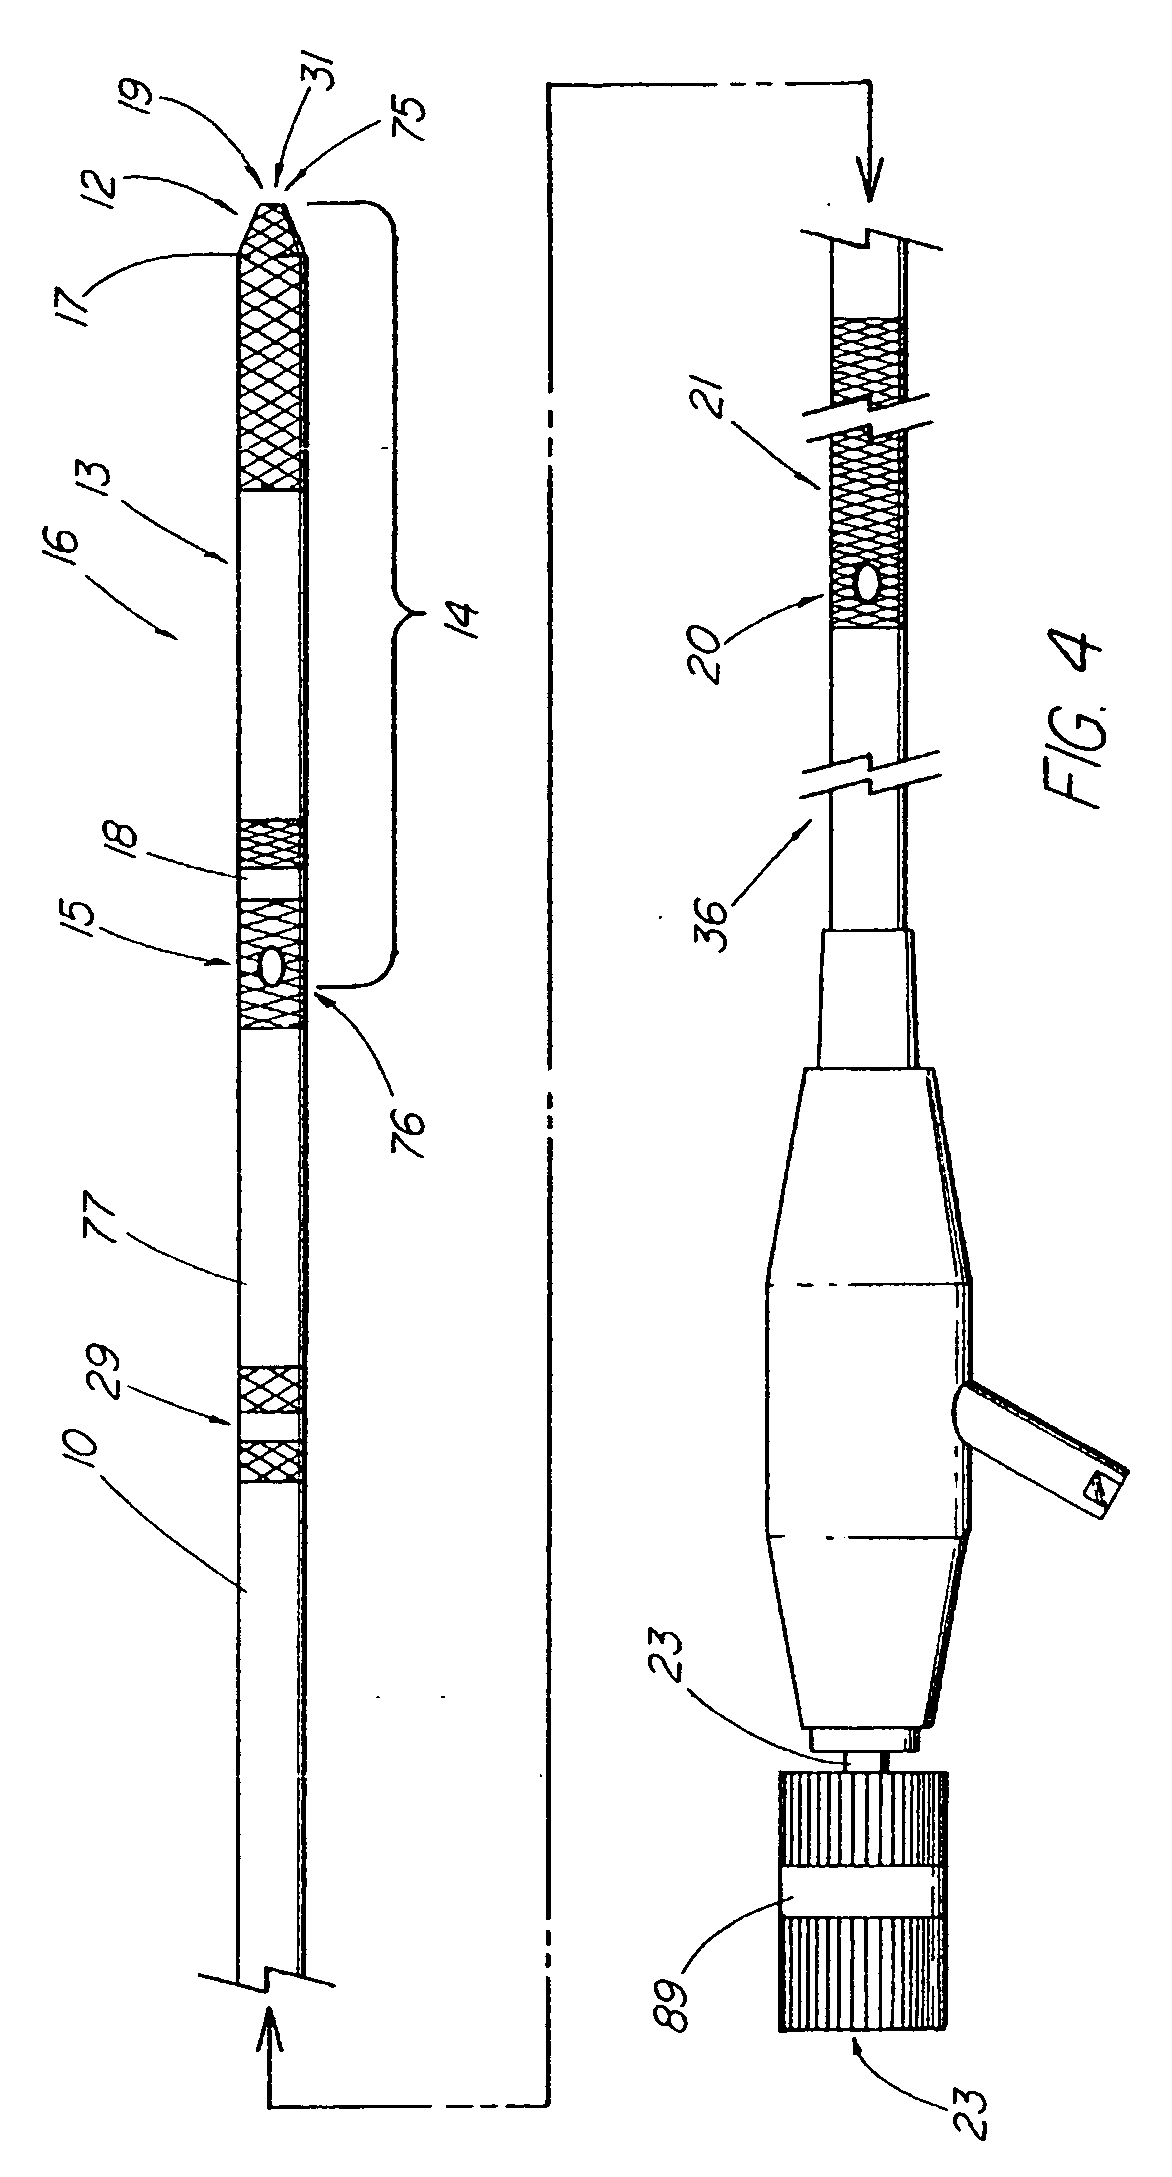 System for introducing multiple medical devices